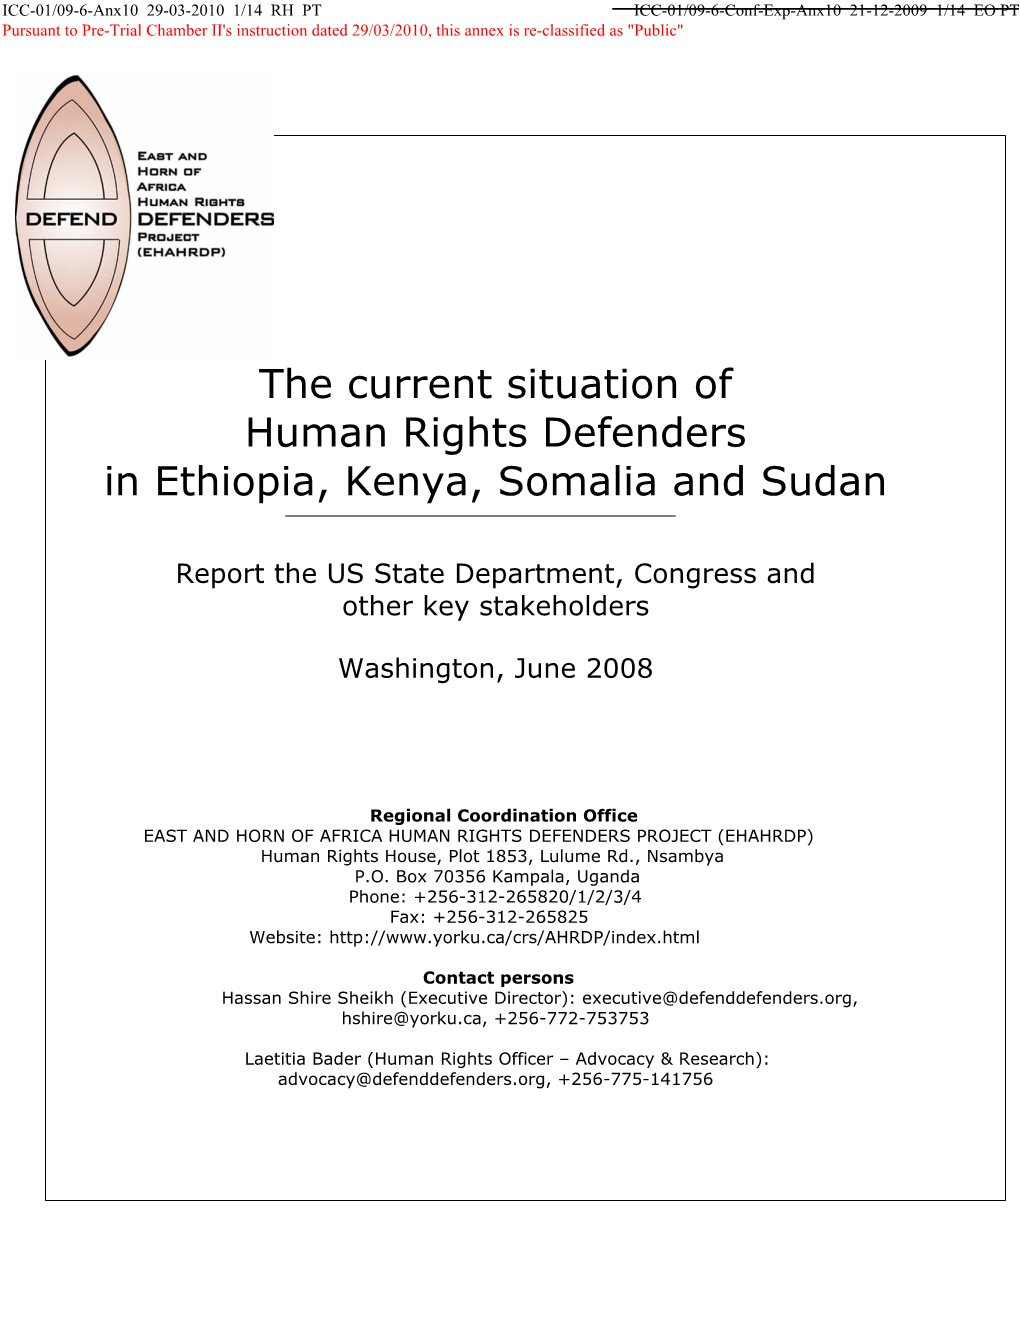 The Current Situation of Human Rights Defenders in Ethiopia, Kenya, Somalia and Sudan